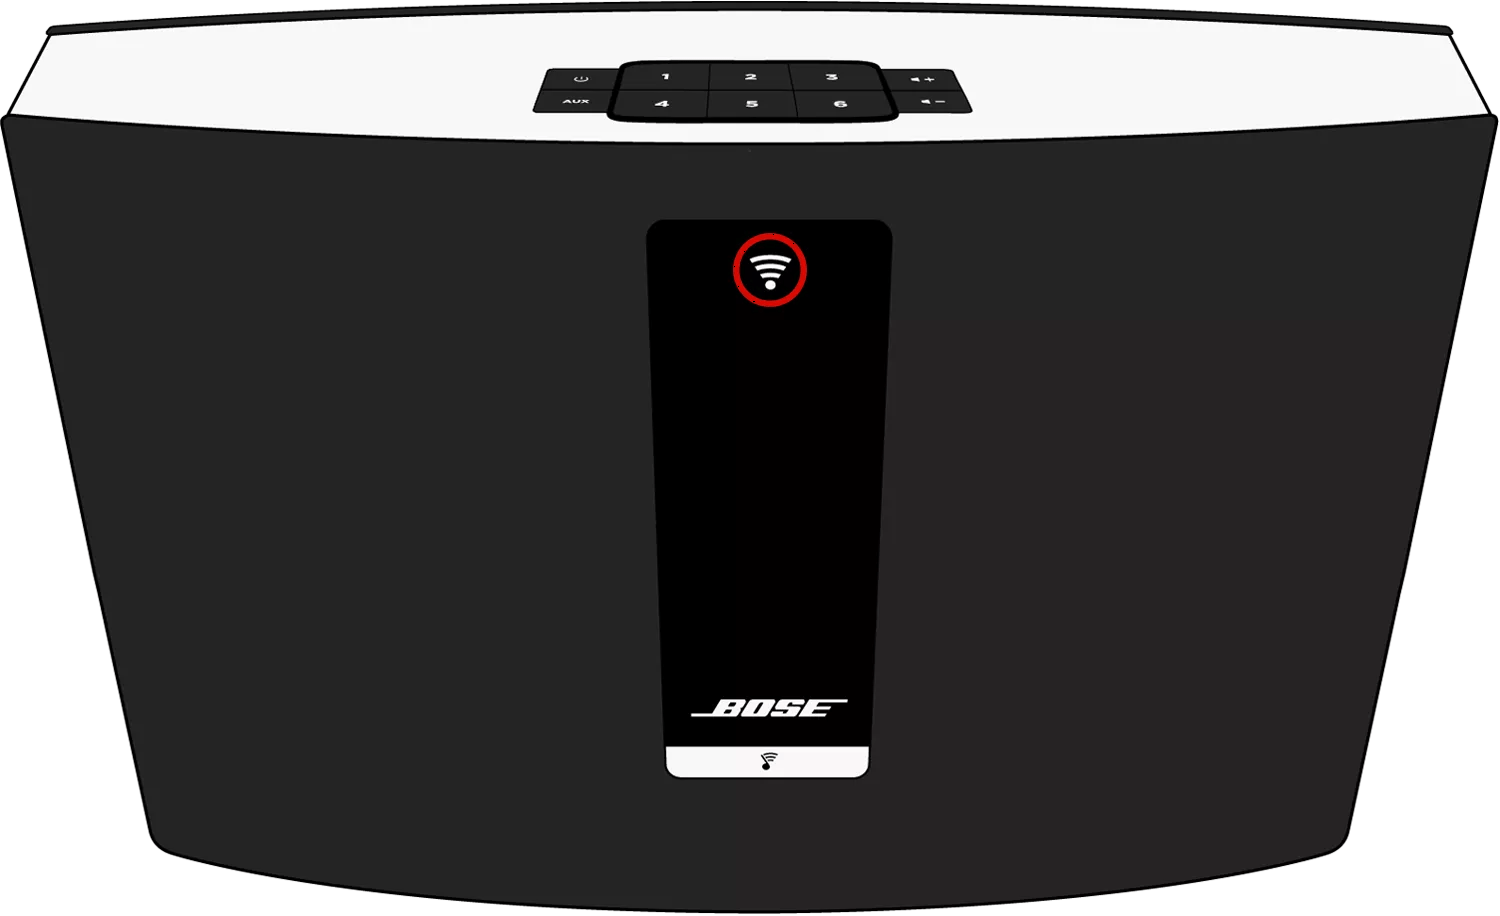 Front of SoundTouch system showing the Wifi icon